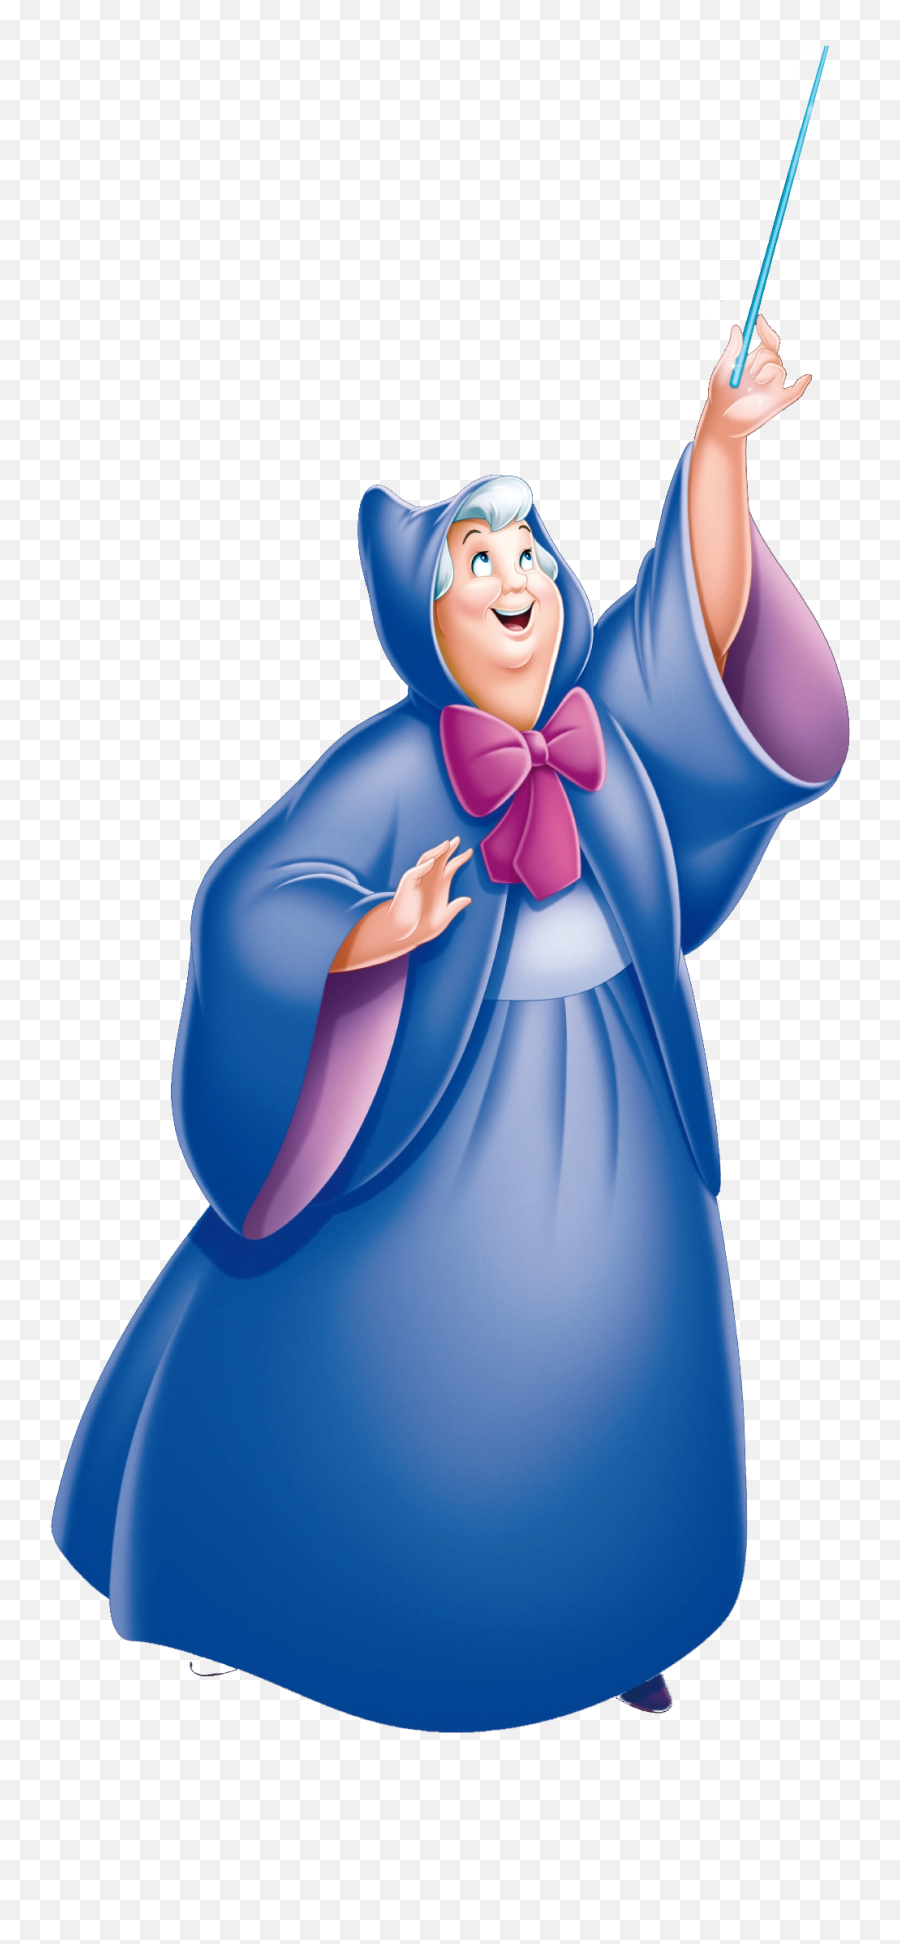 Download Free Png Fairy Godmother - Fairy Godmother Cinderella,Fairy Godmother Png